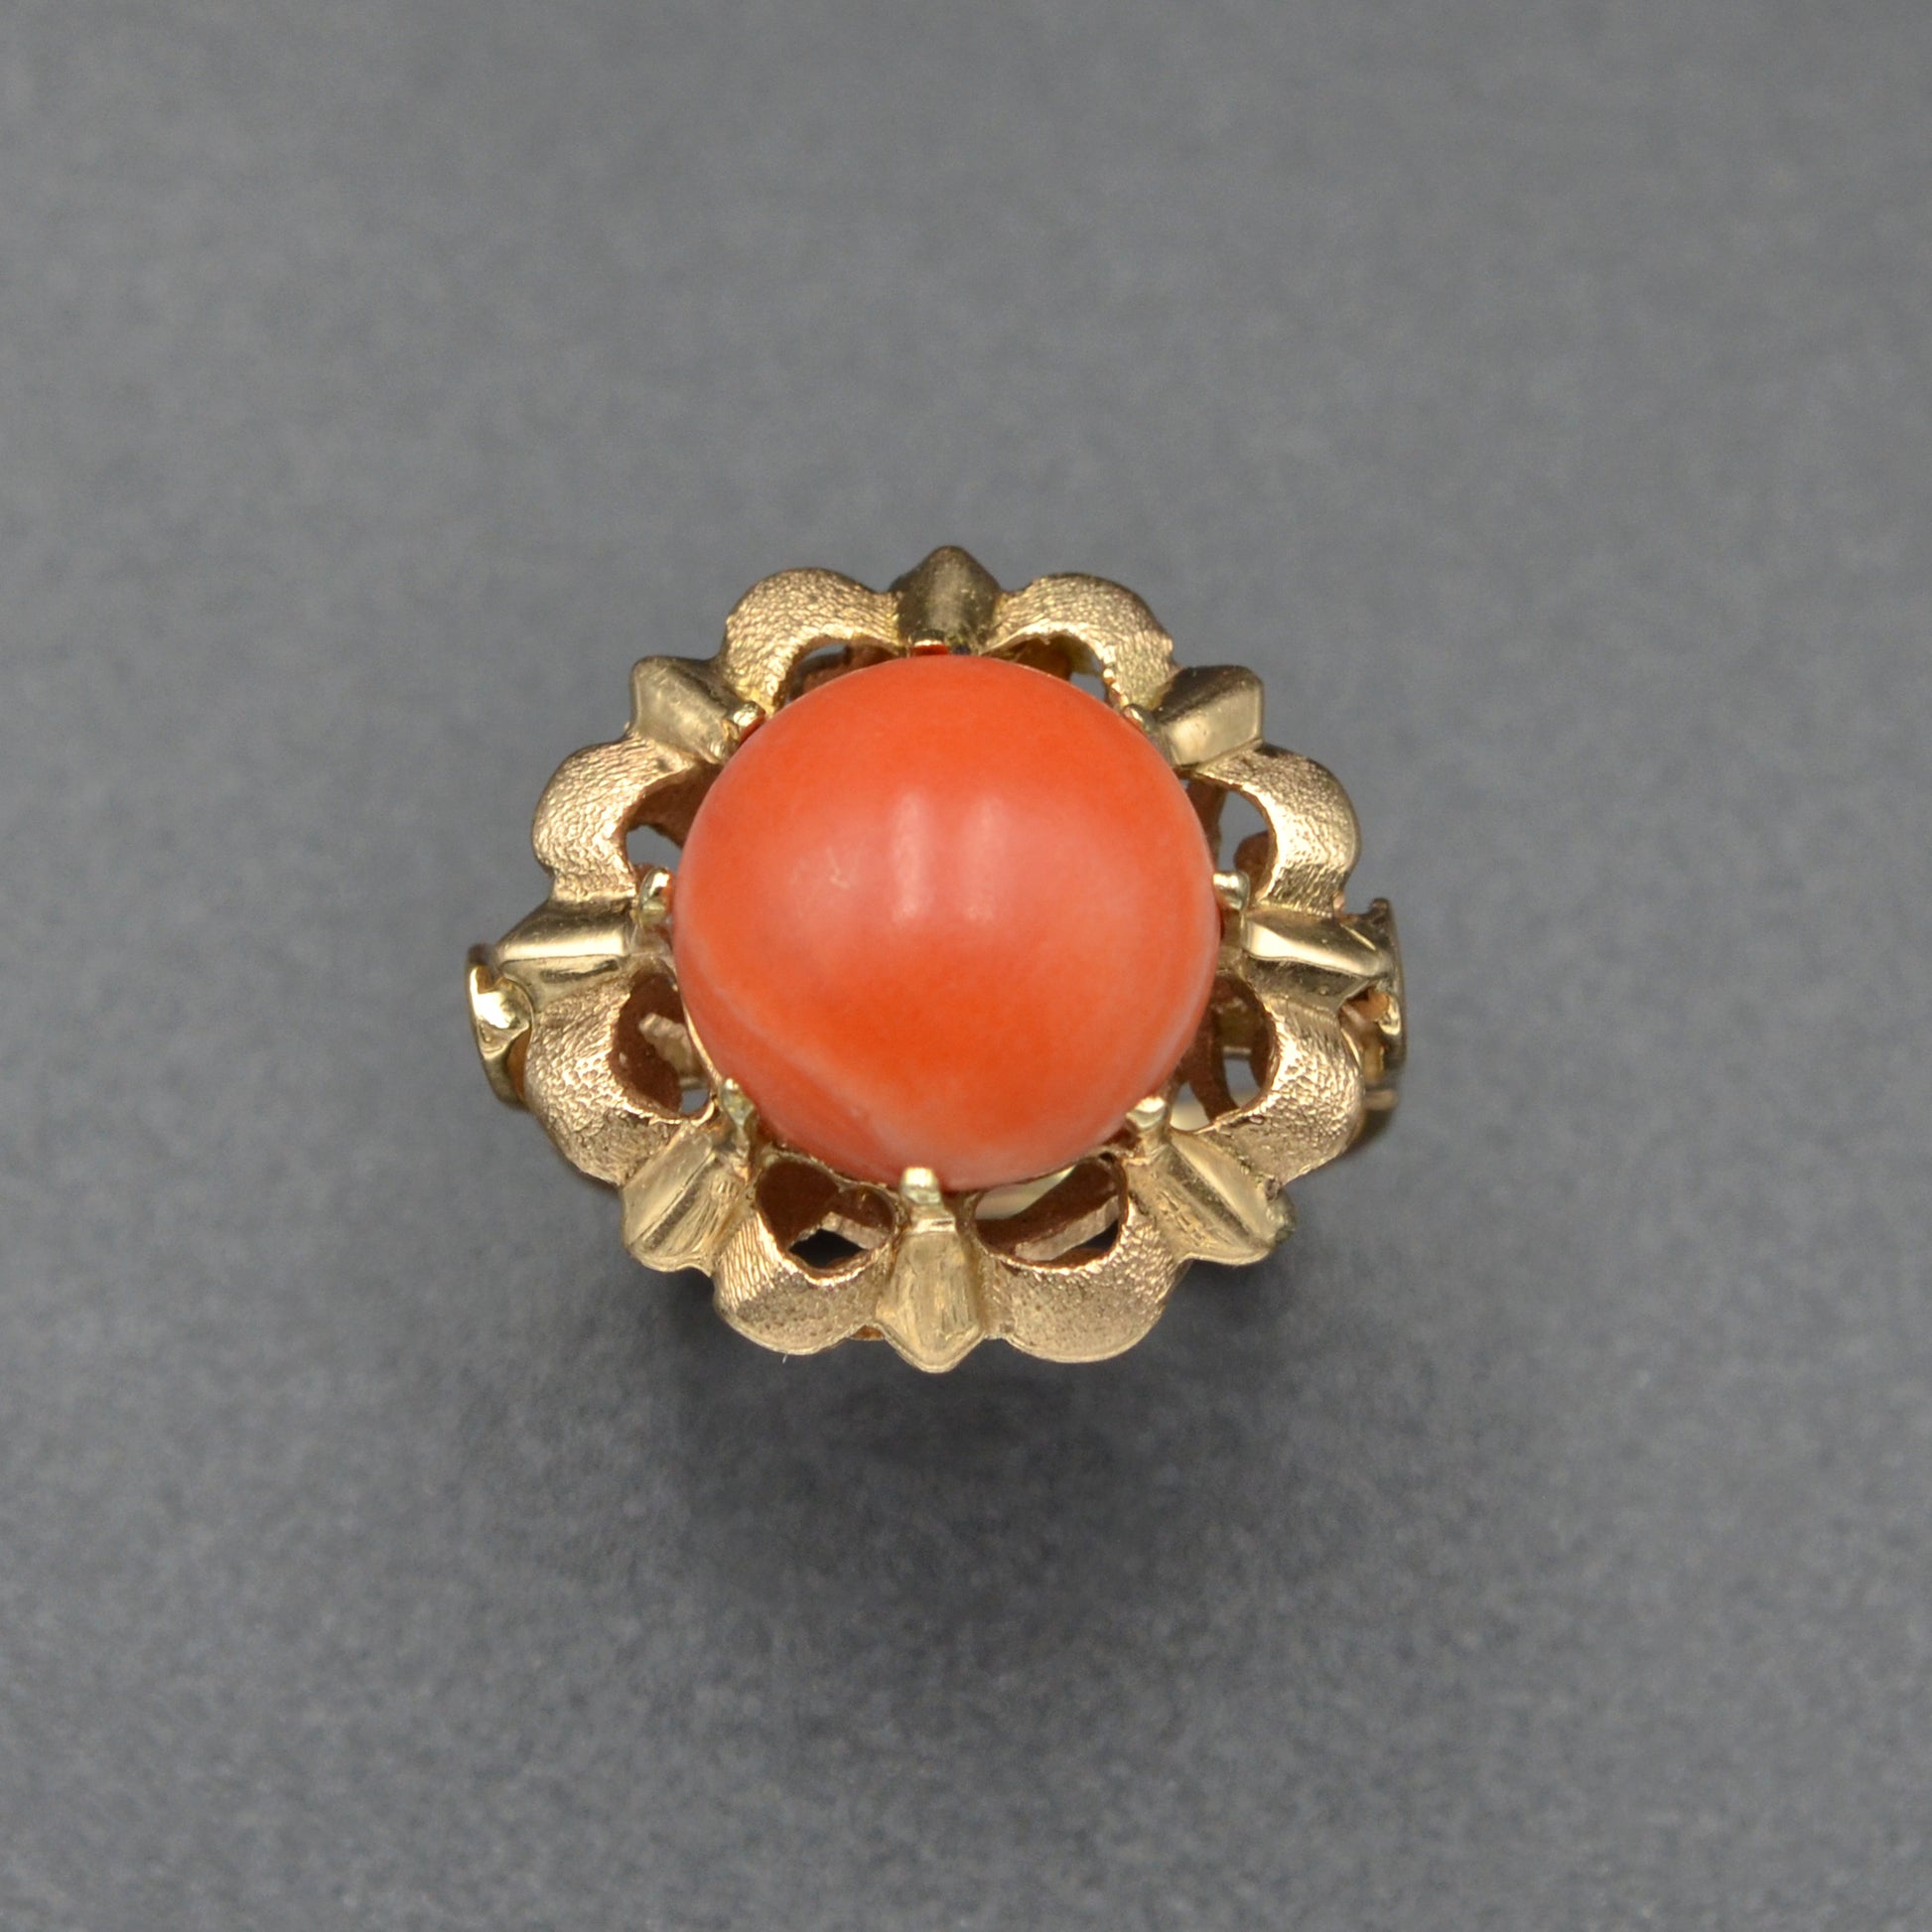 Vintage 1960s Pink Coral and 14k Gold Cocktail Ring